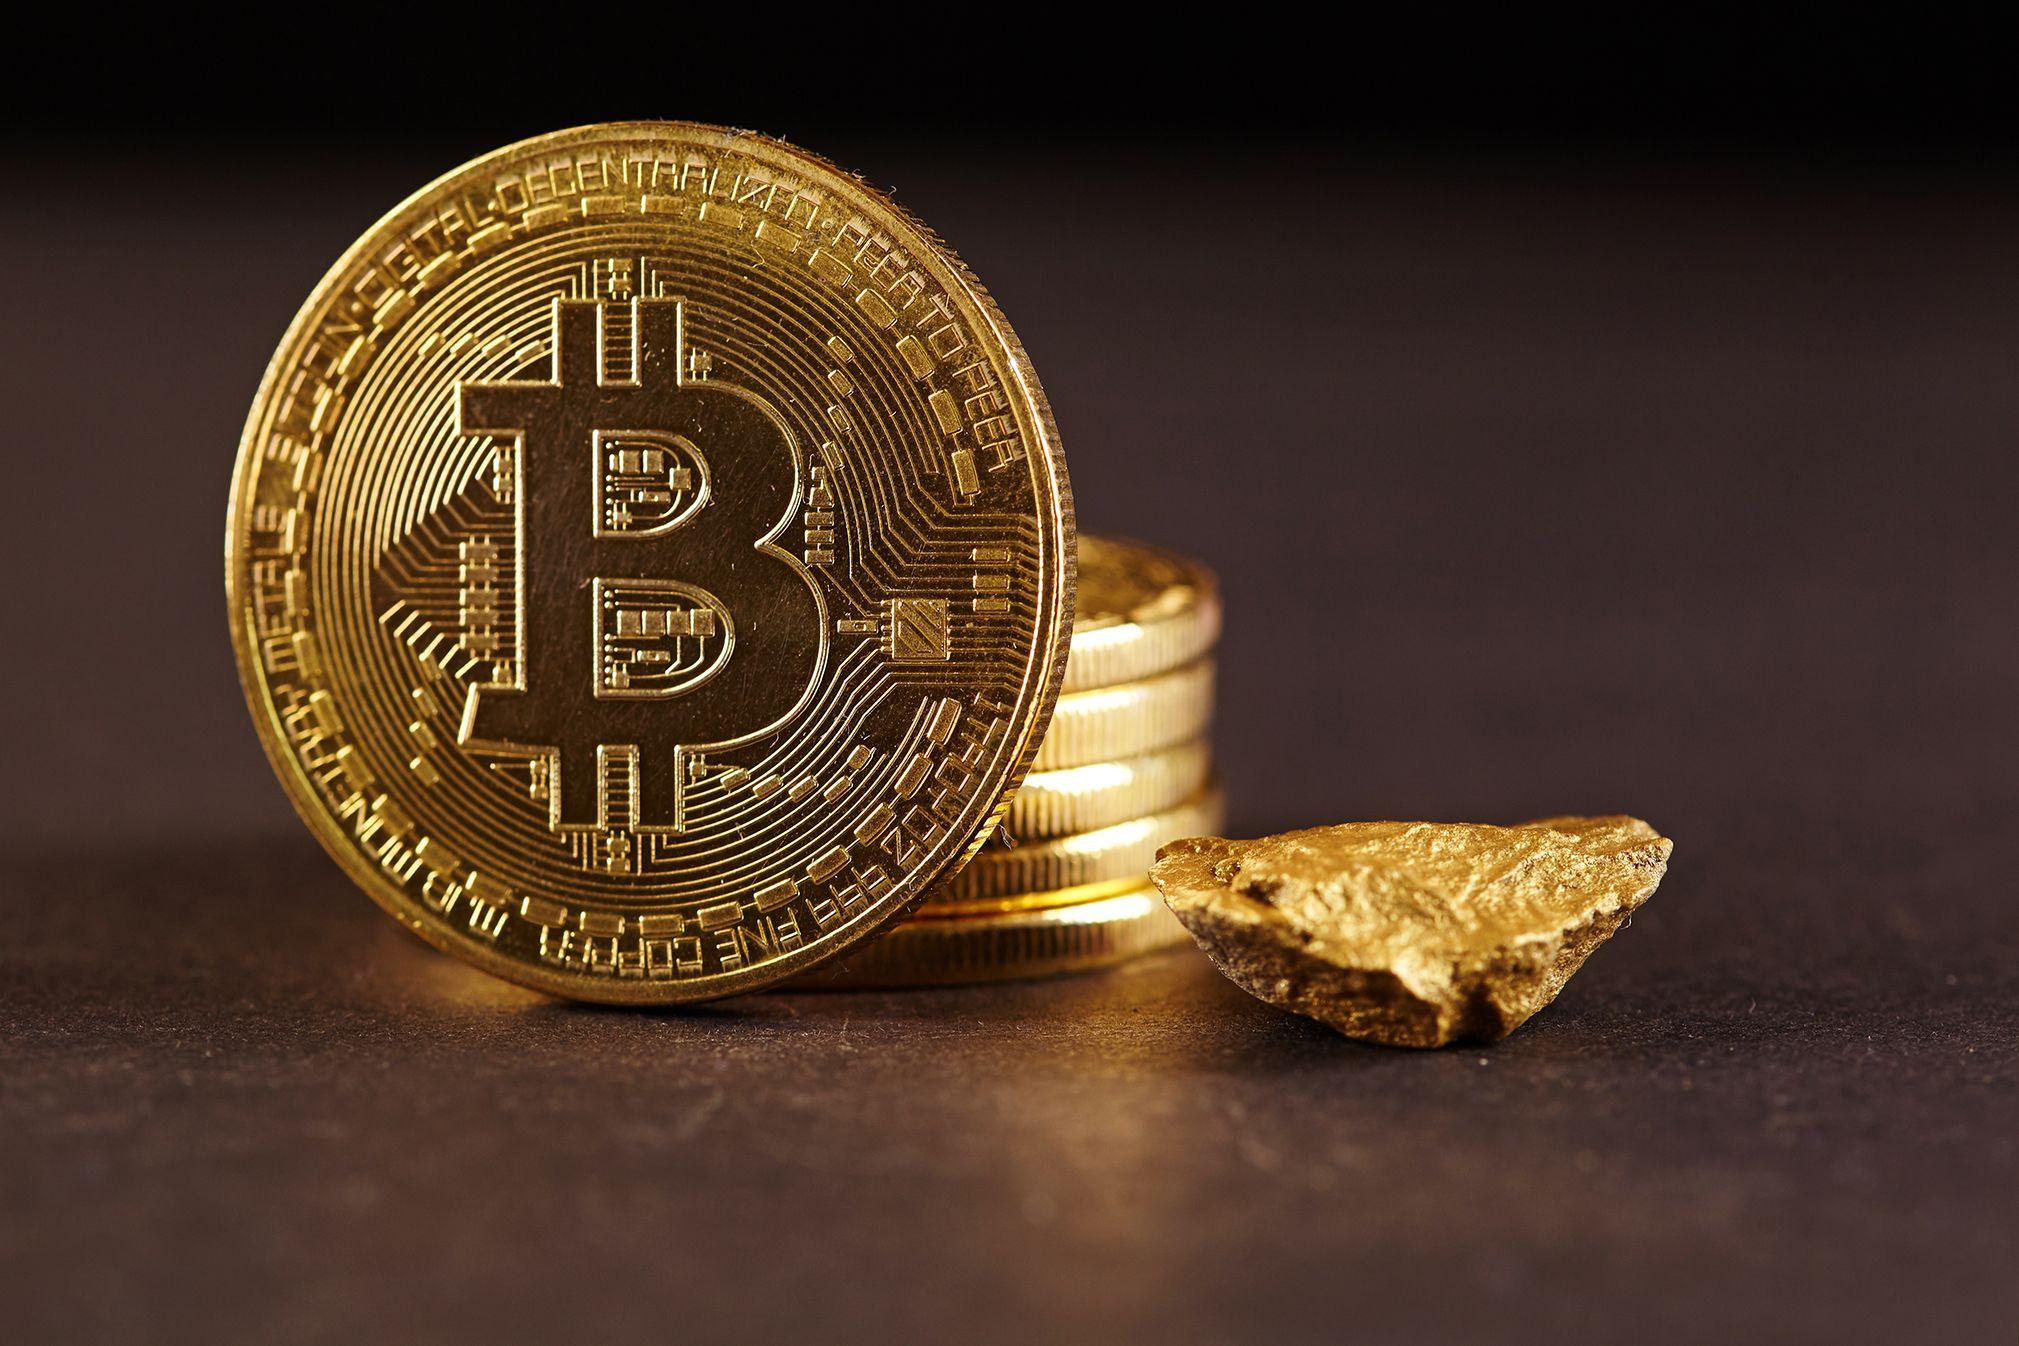 is it better to buy bitcoin or gbtc